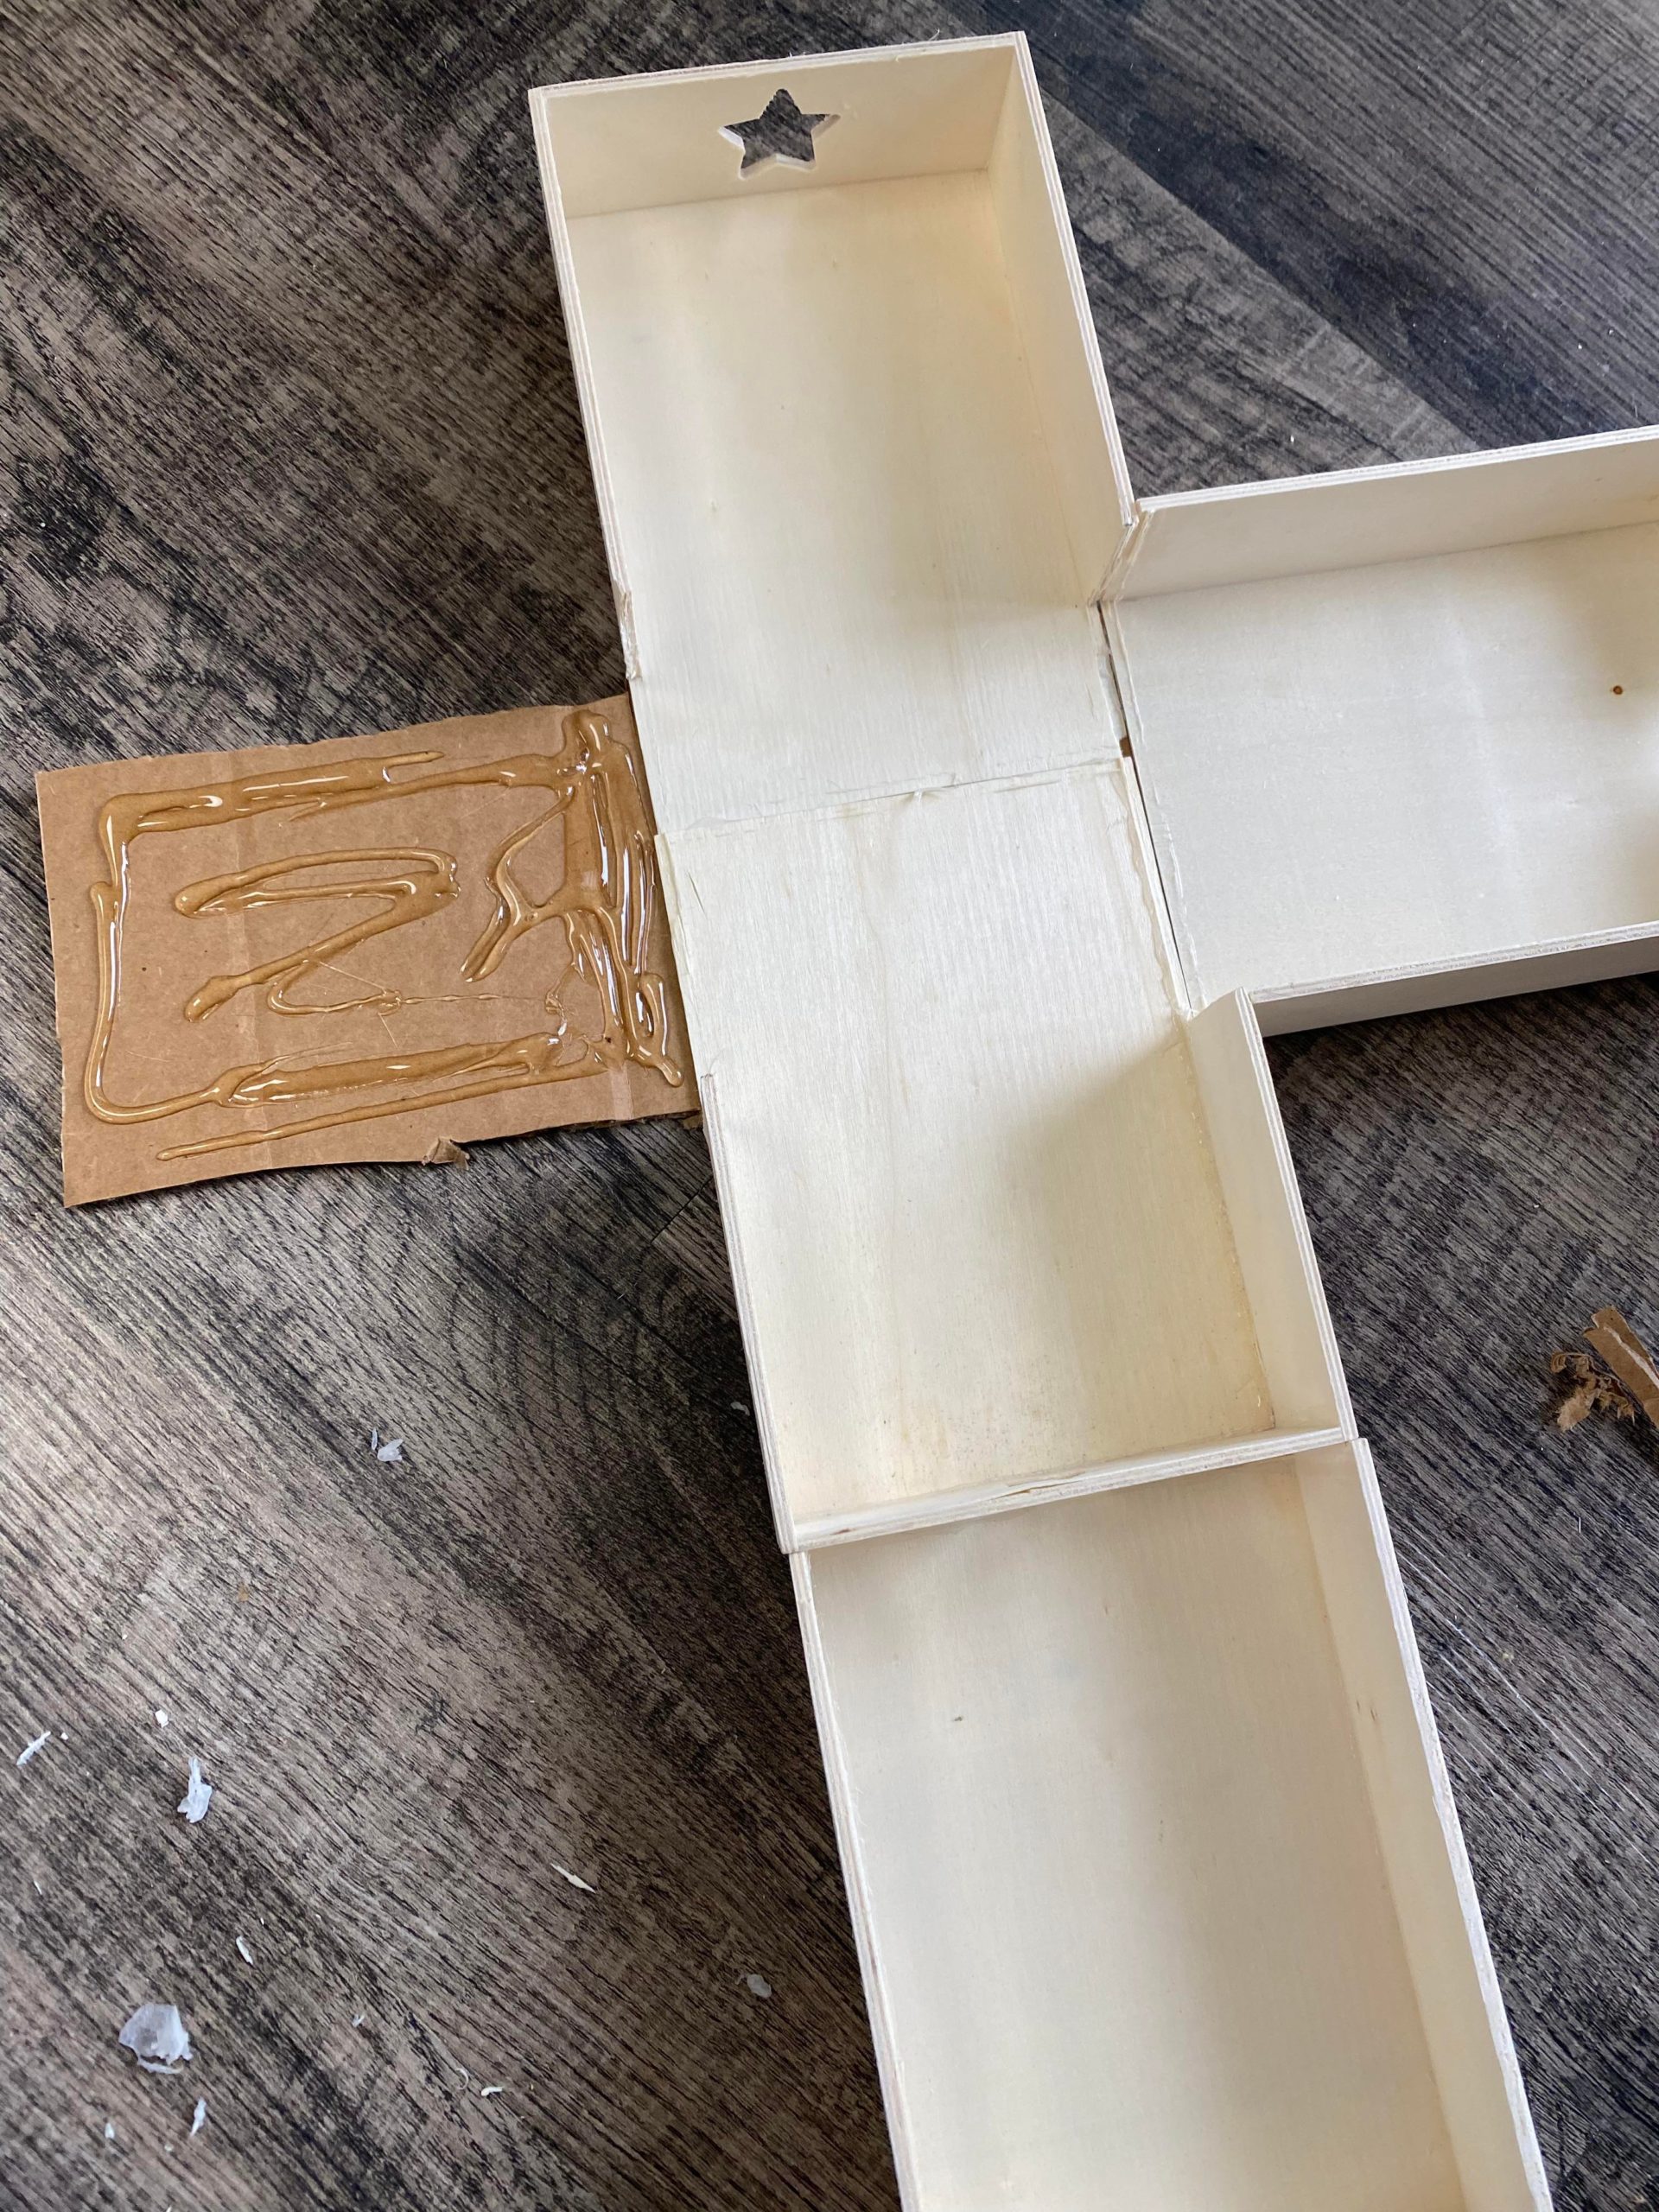 DIY Wooden Cross Using Tumbling Tower Pieces - The Shabby Tree